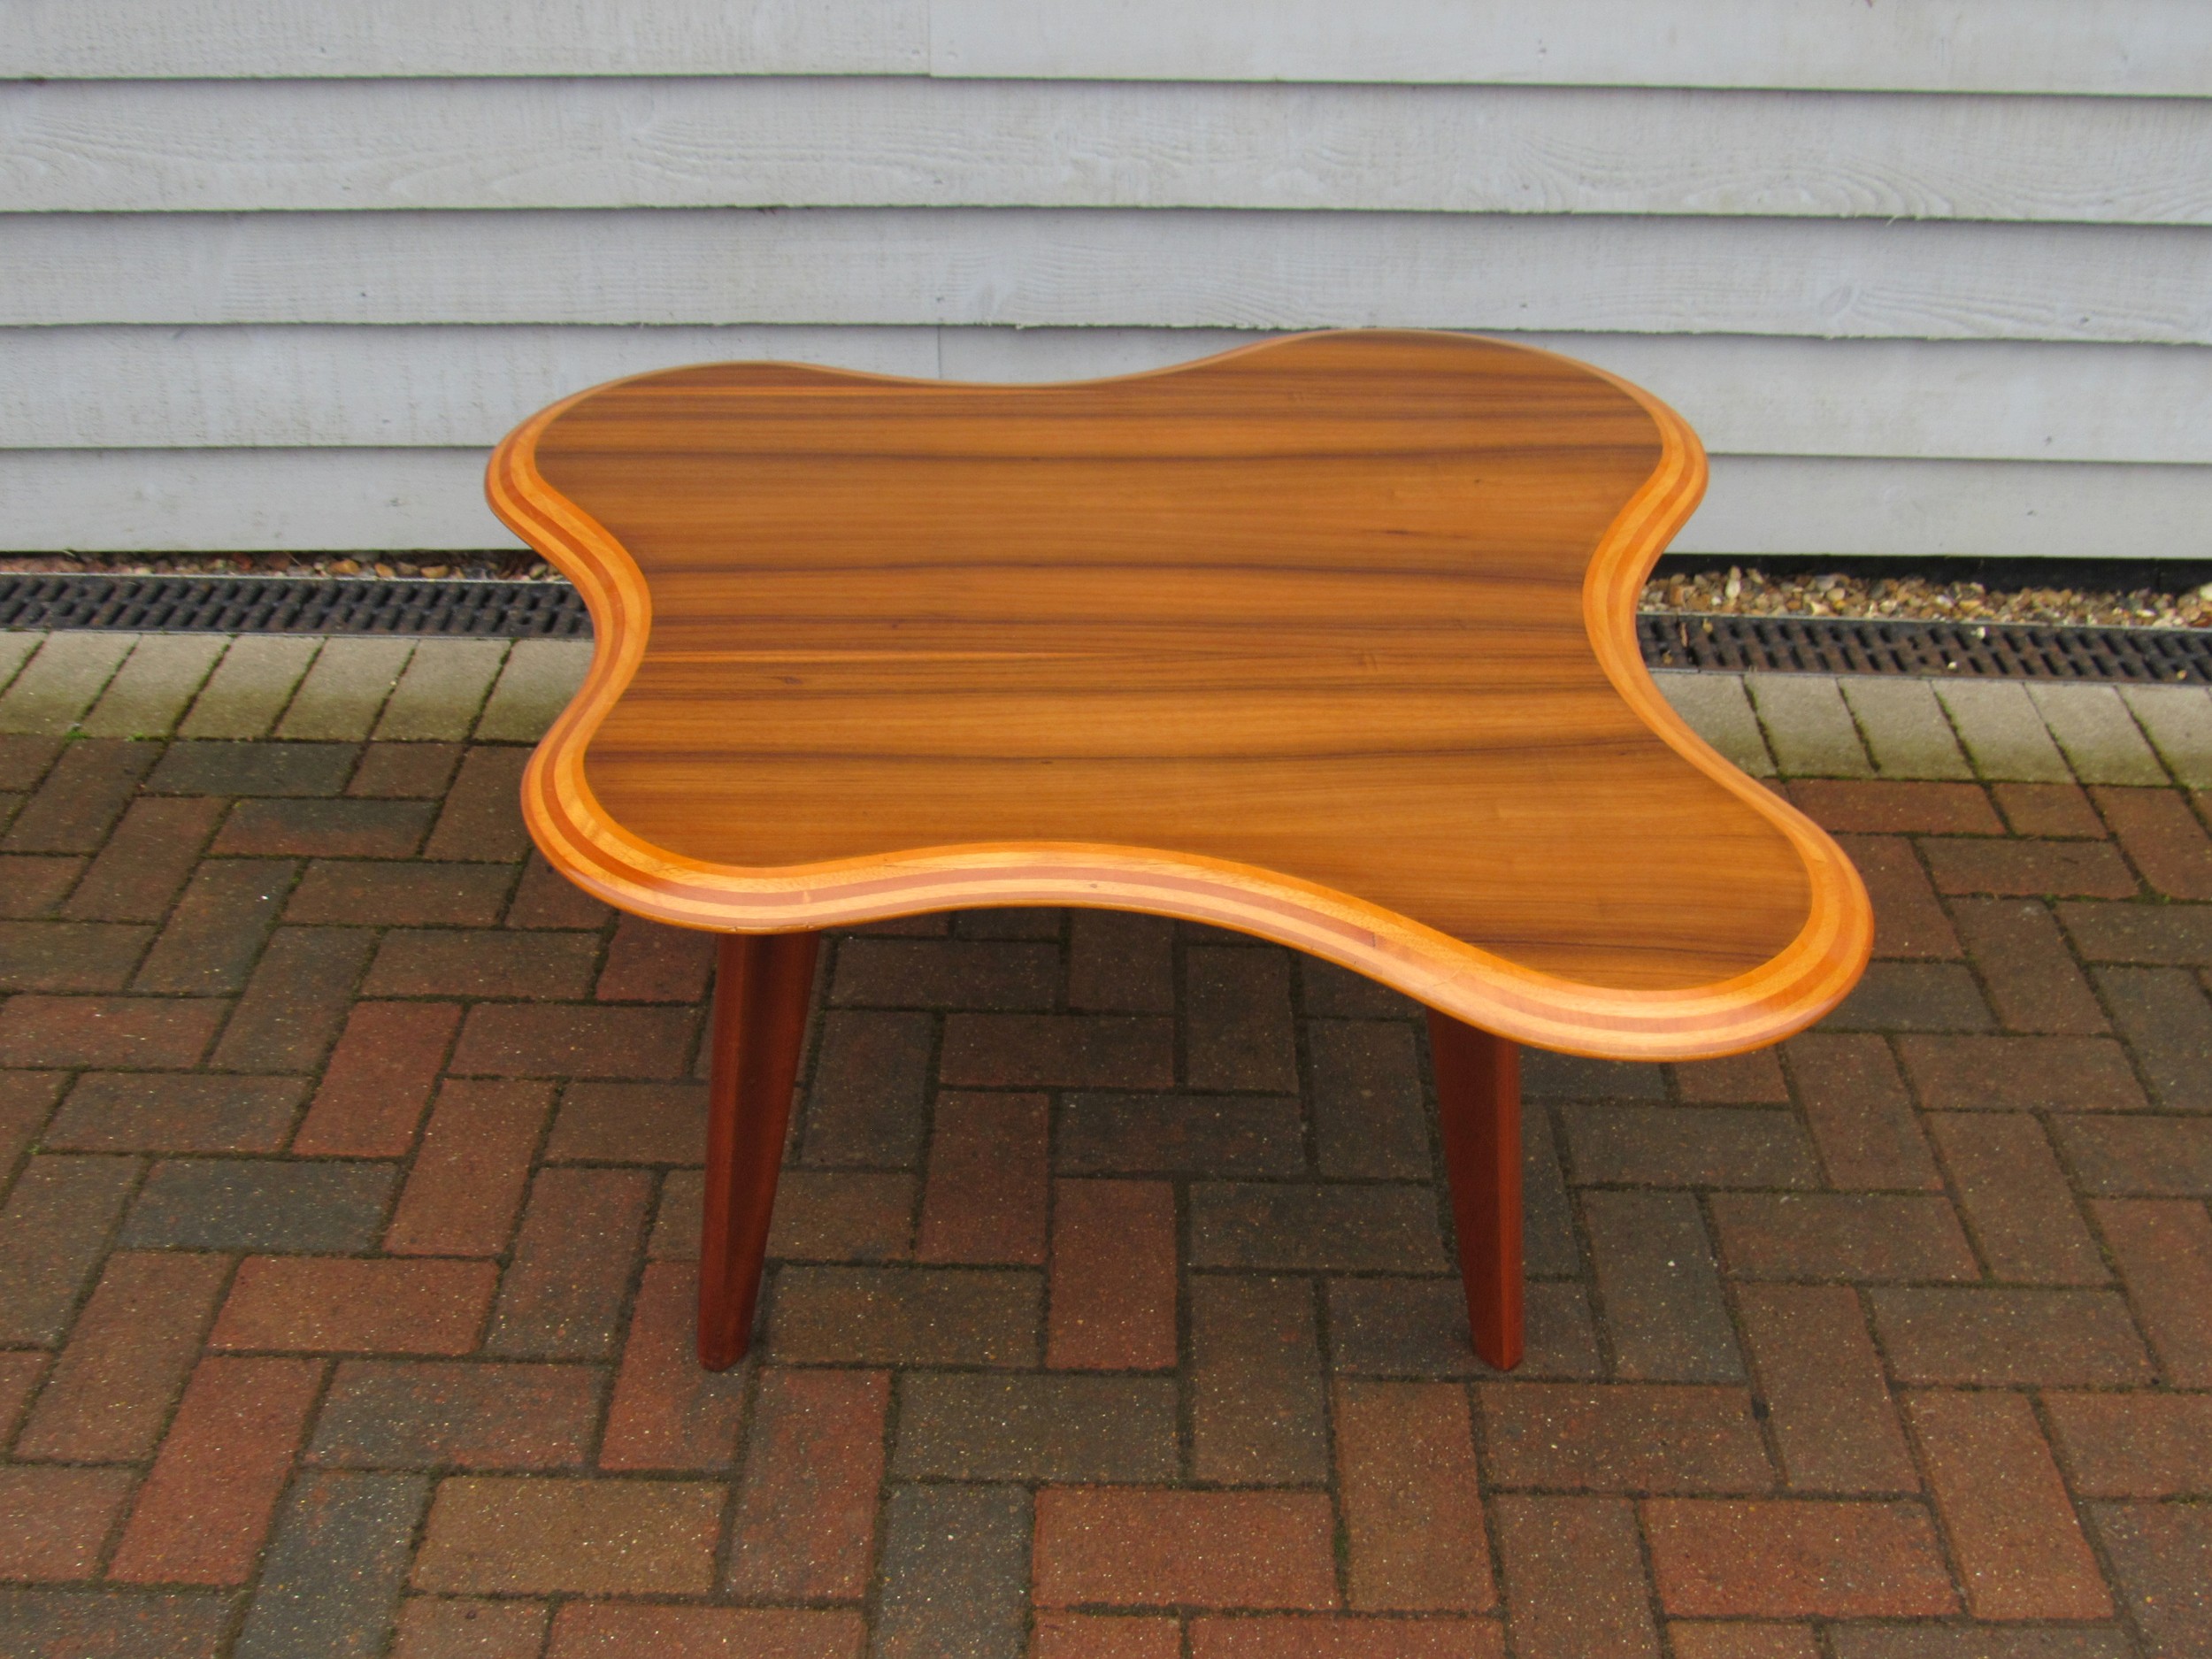 Neil Morris for Morris of Glasgow - A 'Cloud' coffee table designed in 1947 with shaped laminated